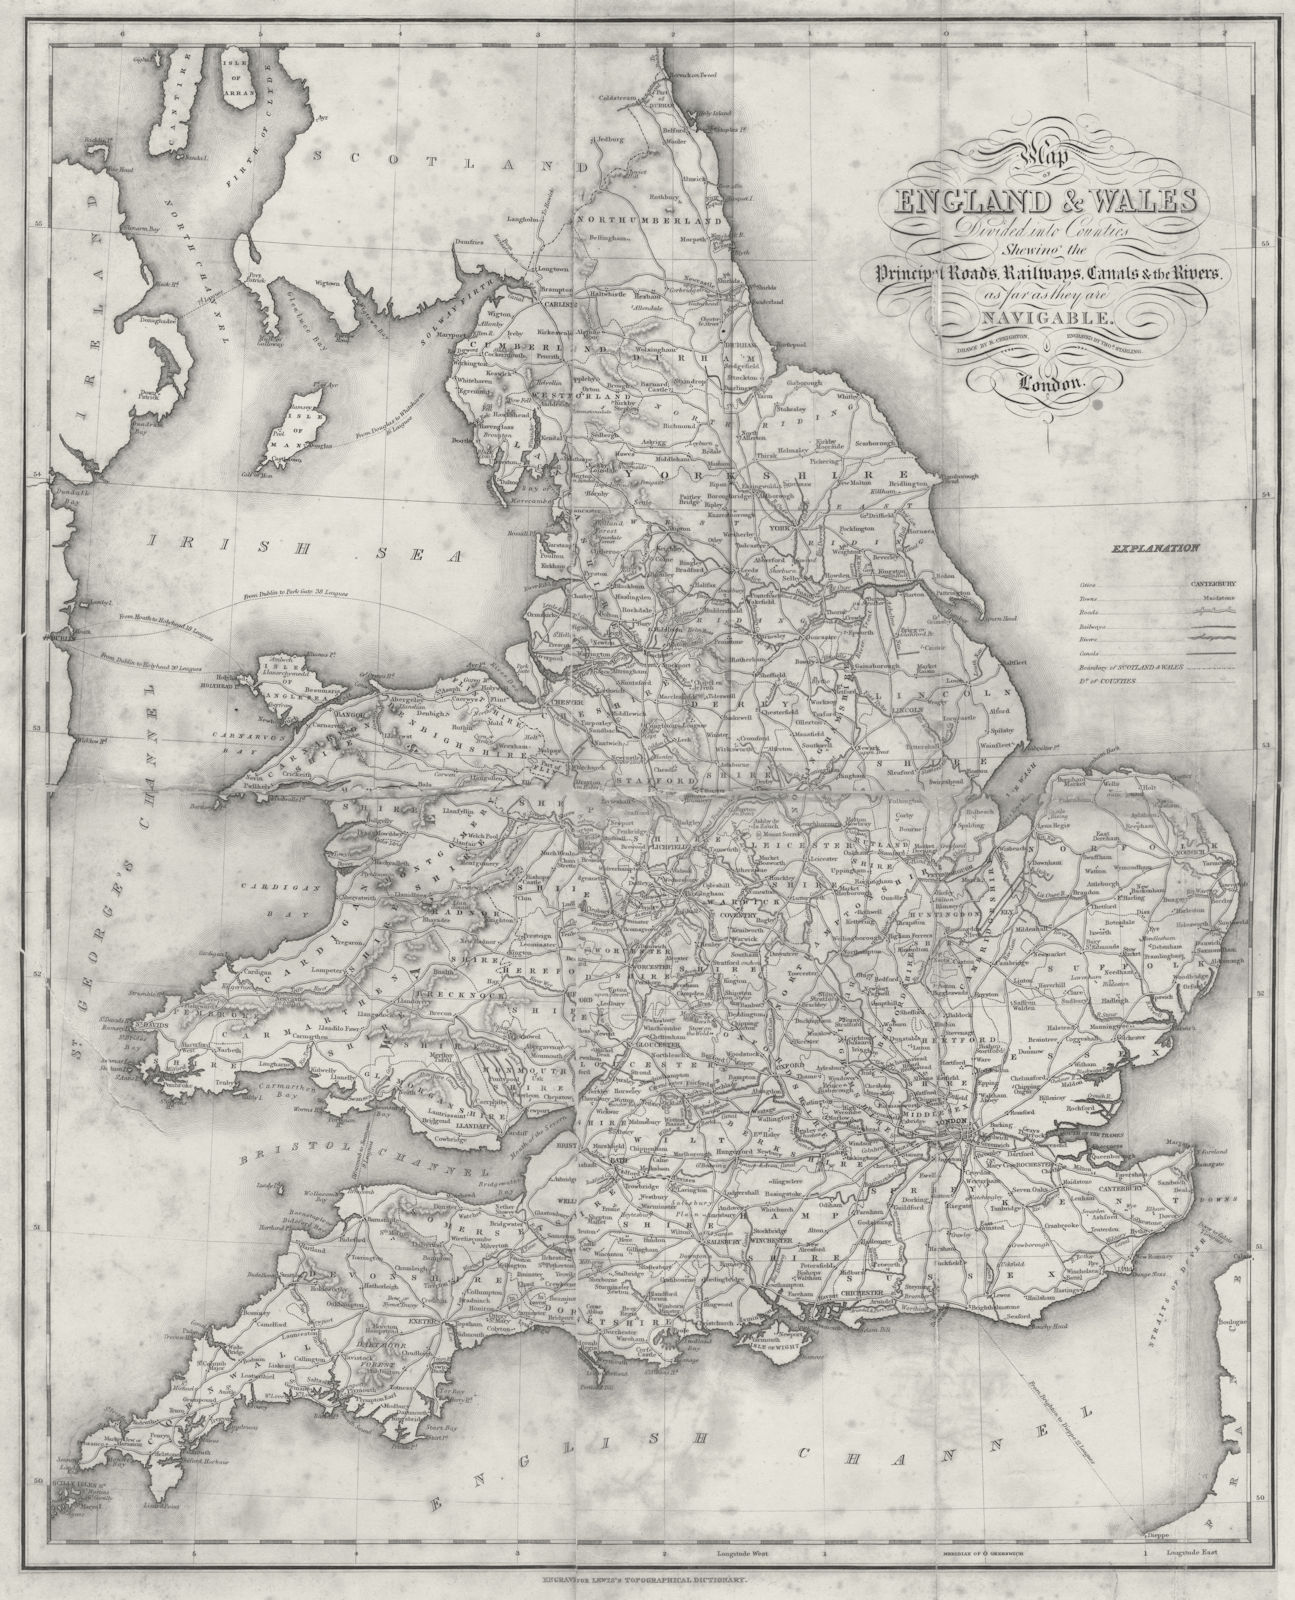 Associate Product ENGLAND WALES. Roads, rail, canals, rivers. Lewis 1831 old antique map chart